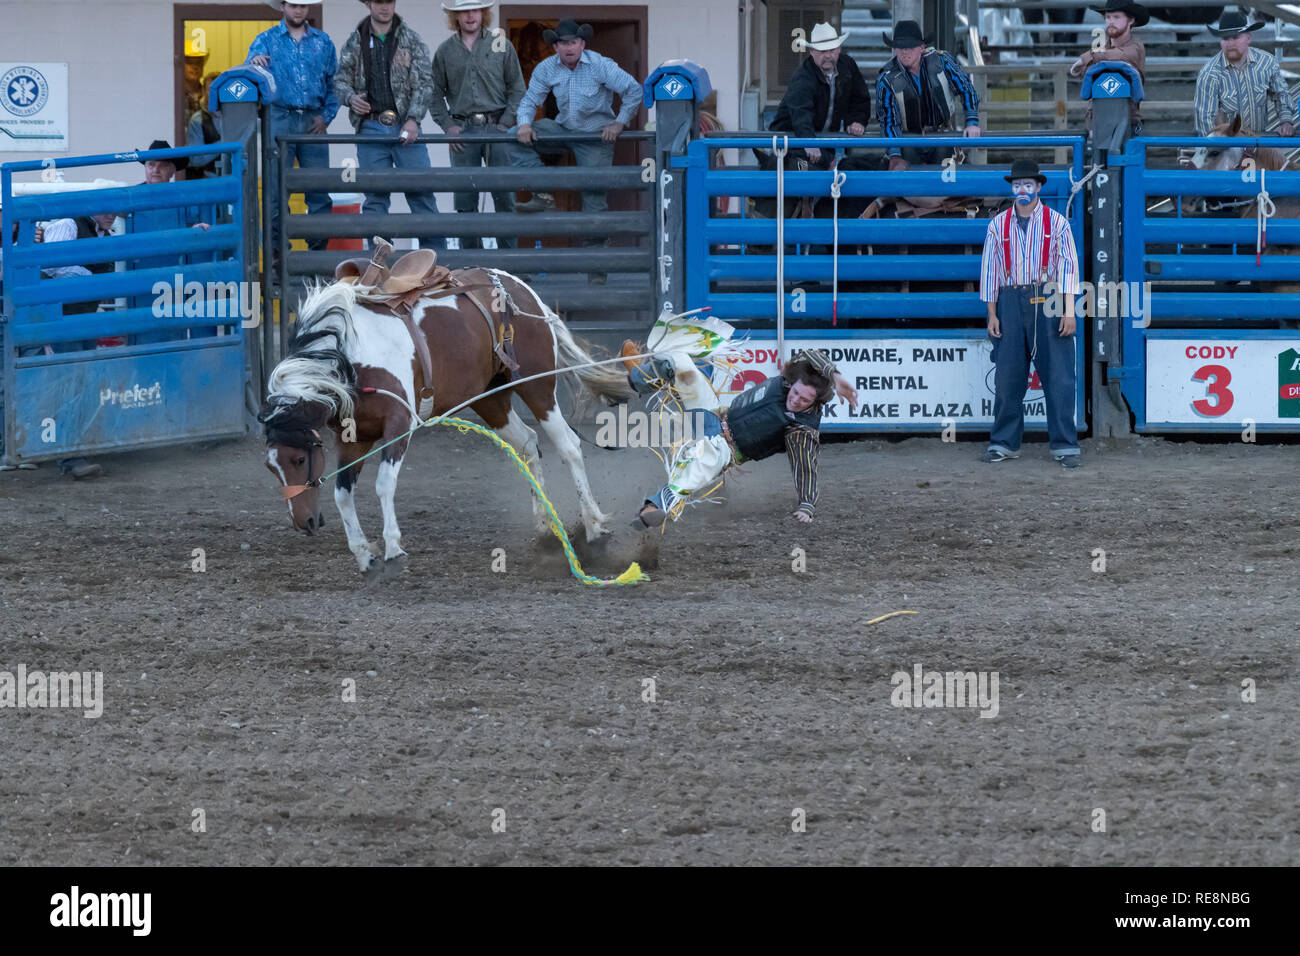 CODY, WYOMING - JUNE 29, 2018: Cody Stampede Park arena. Cody is the Rodeo Capitol of the World. 2018 marks 80th anniversary of nightly performances. Stock Photo